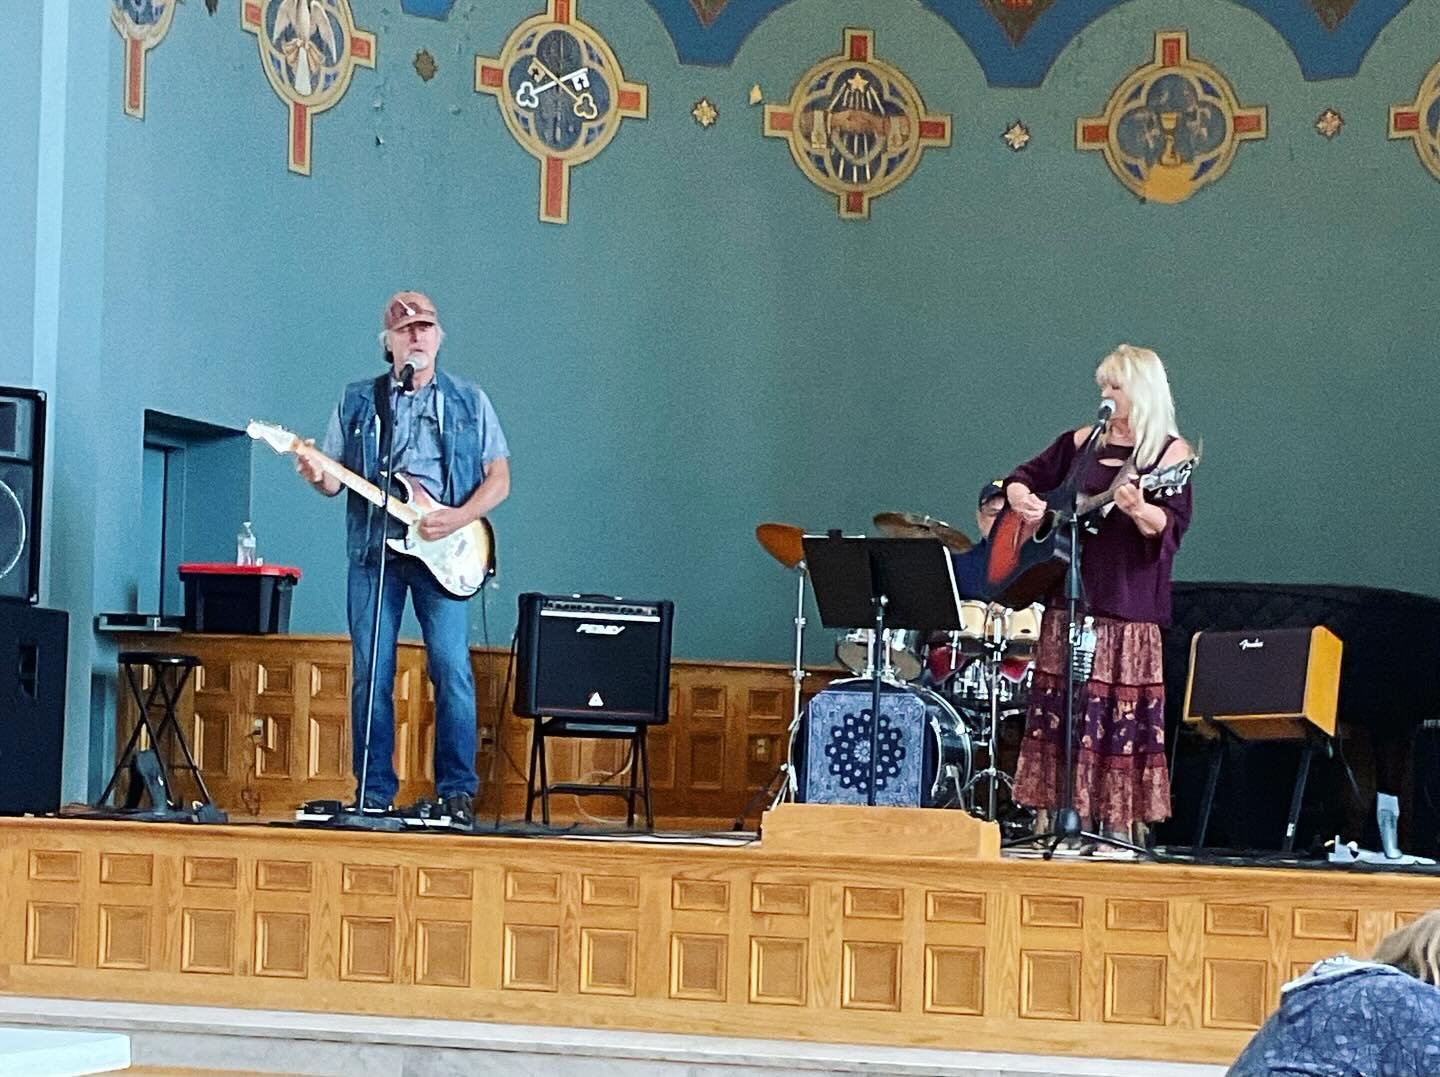 Thanks for an awesome show! Can&rsquo;t wait to have these guys back! Wilma Cutlip, Ed VanHorn and Matt Riggleman. Thanks Davis Trust for sponsoring us!
#artselkins #arts #brownbagconcerts #concerts #davistrustcompany